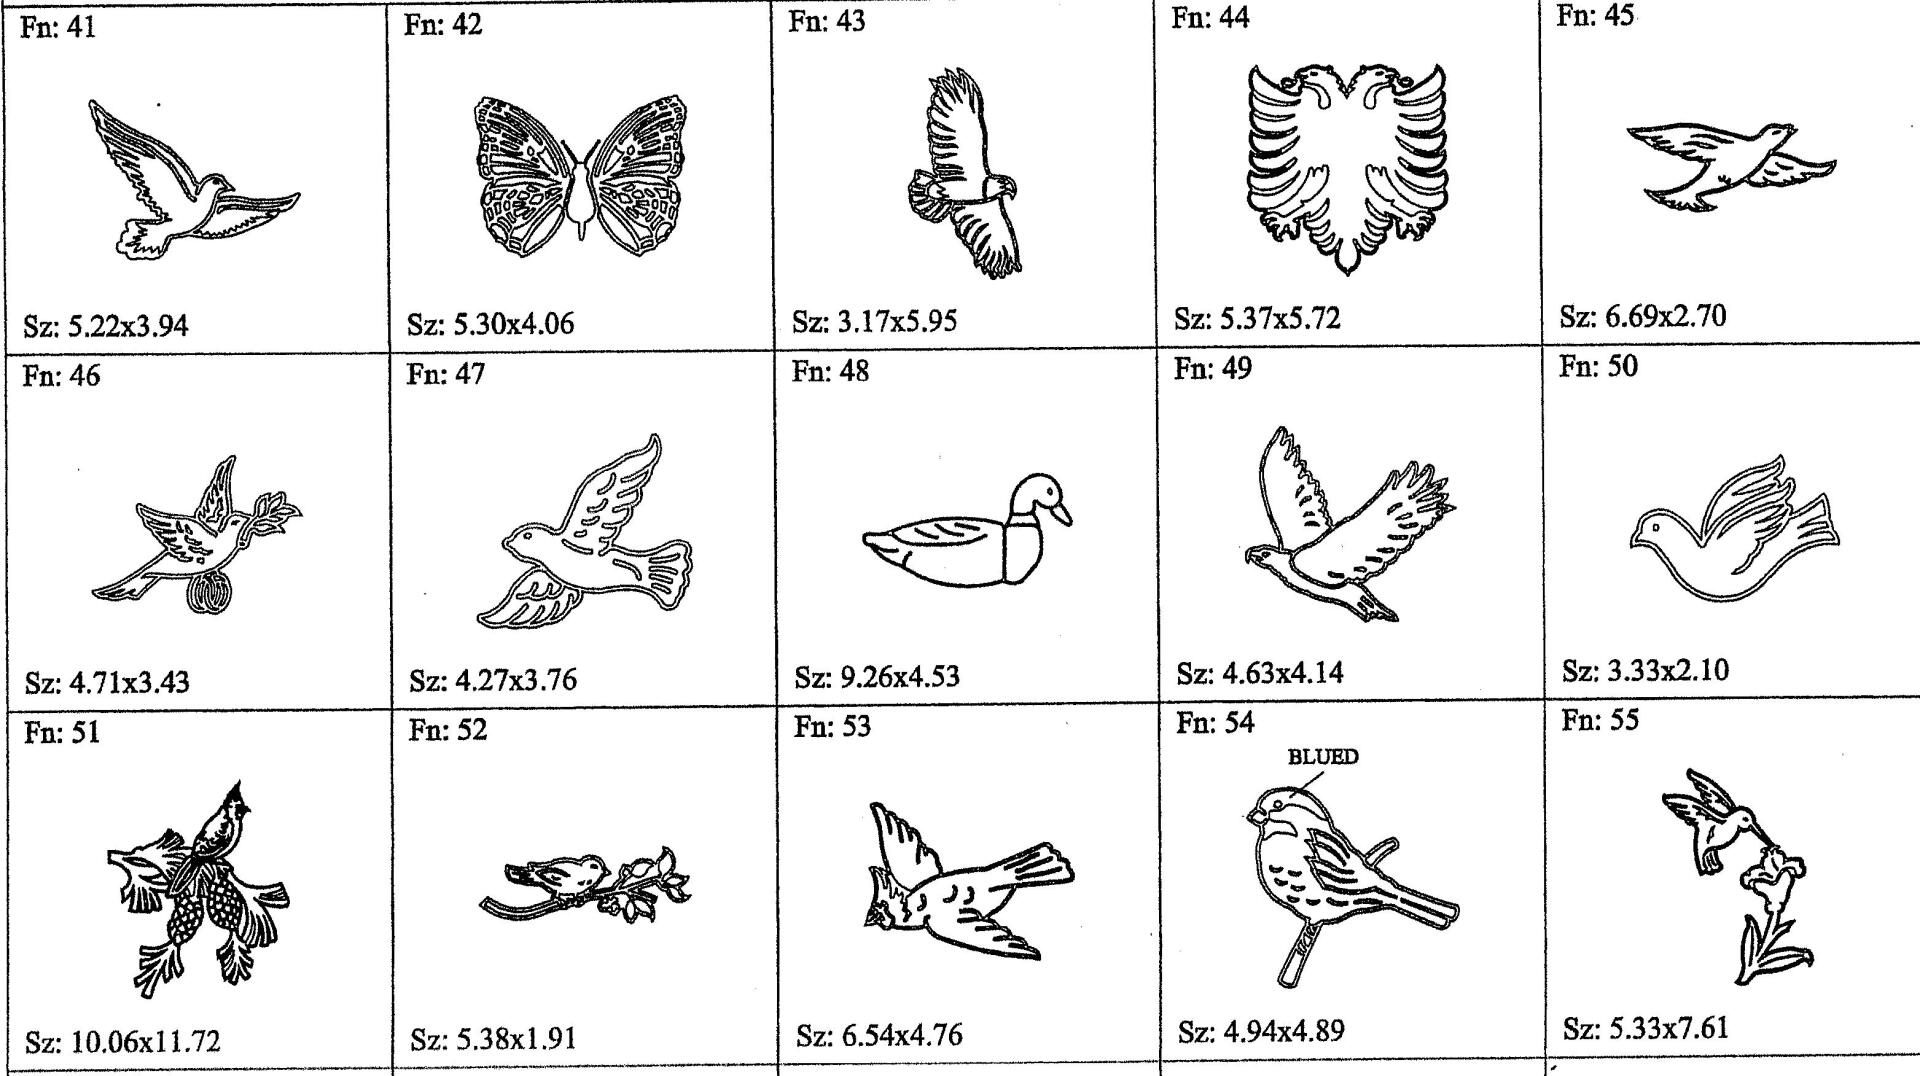 a bunch of drawings of birds and butterflies on a white background